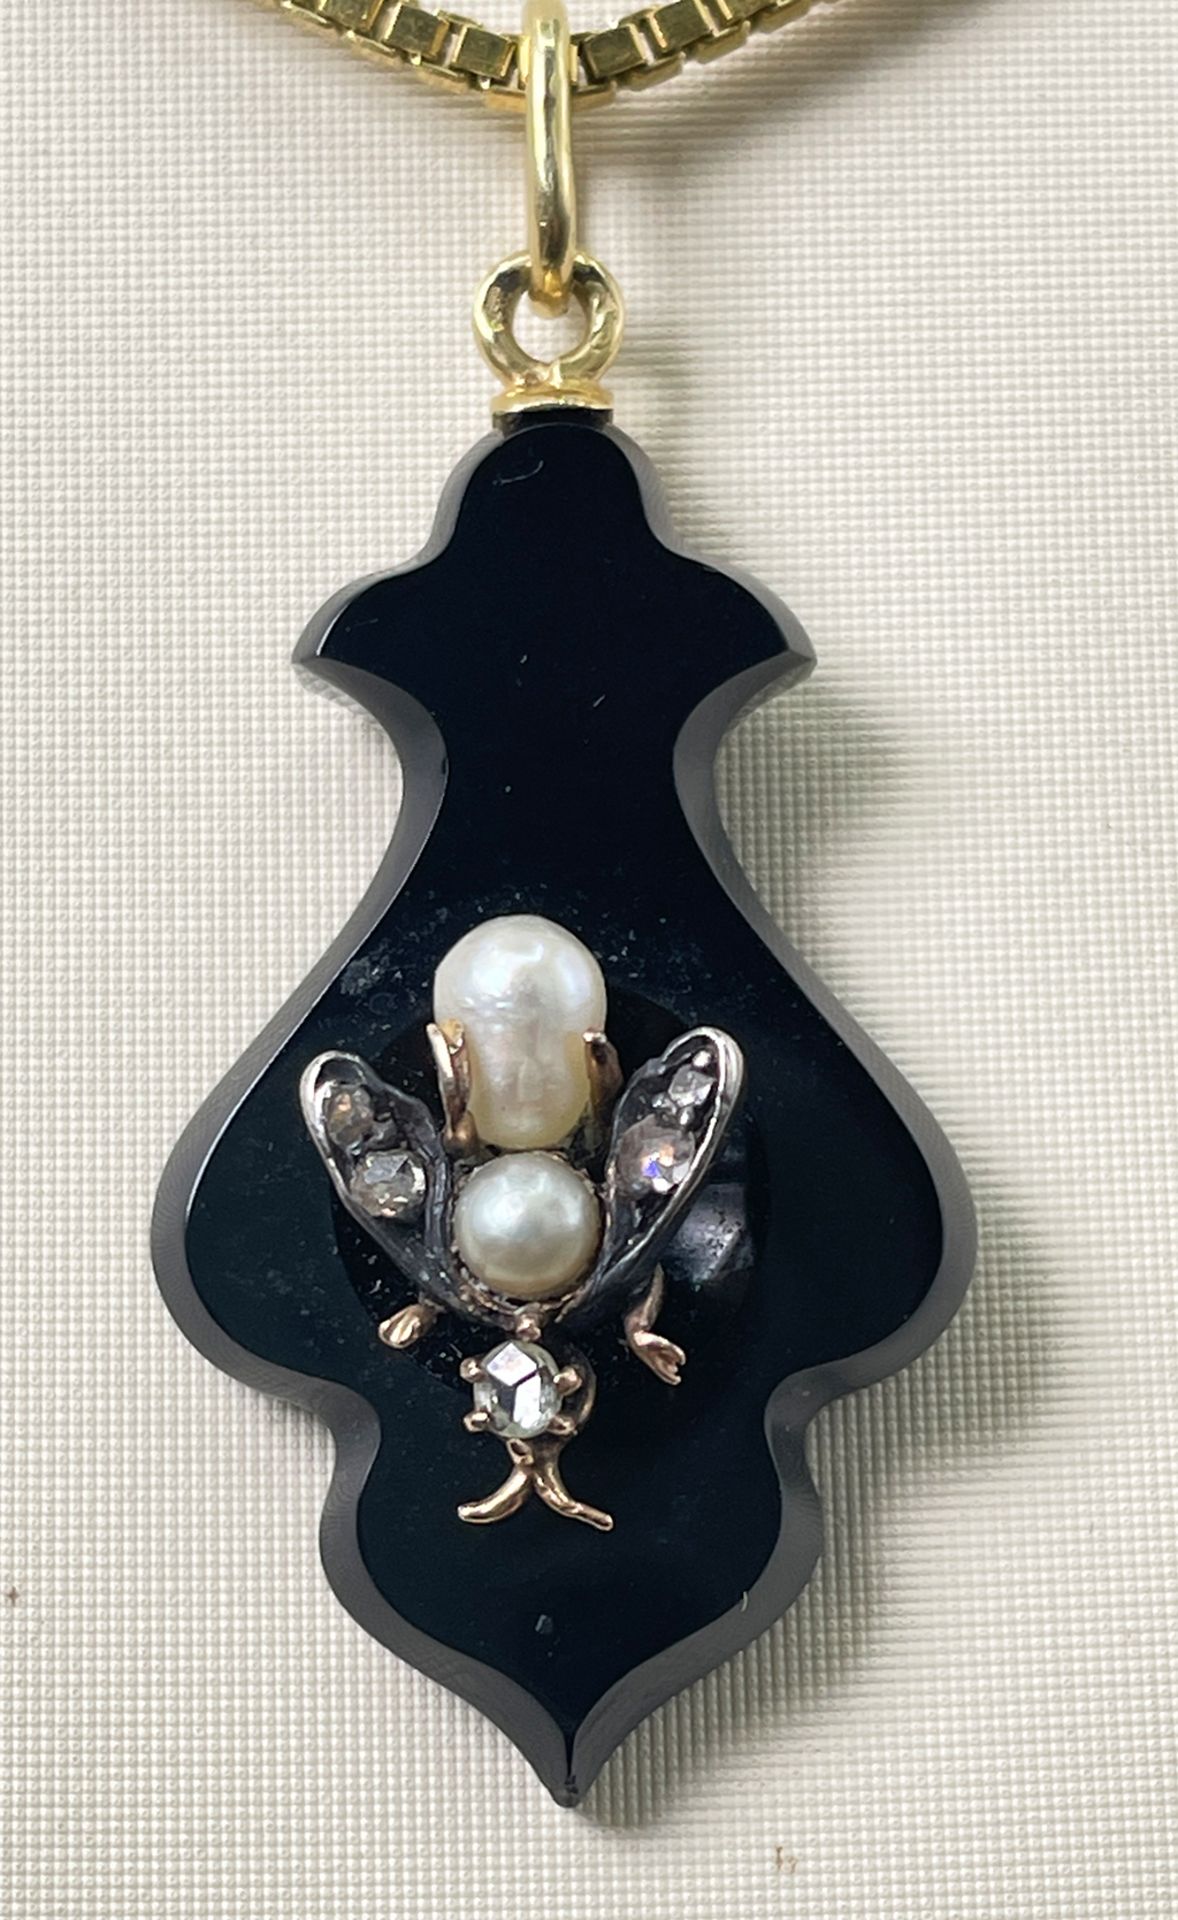 Antique onyx pendant, with 14K gold insect, pearls and diamonds